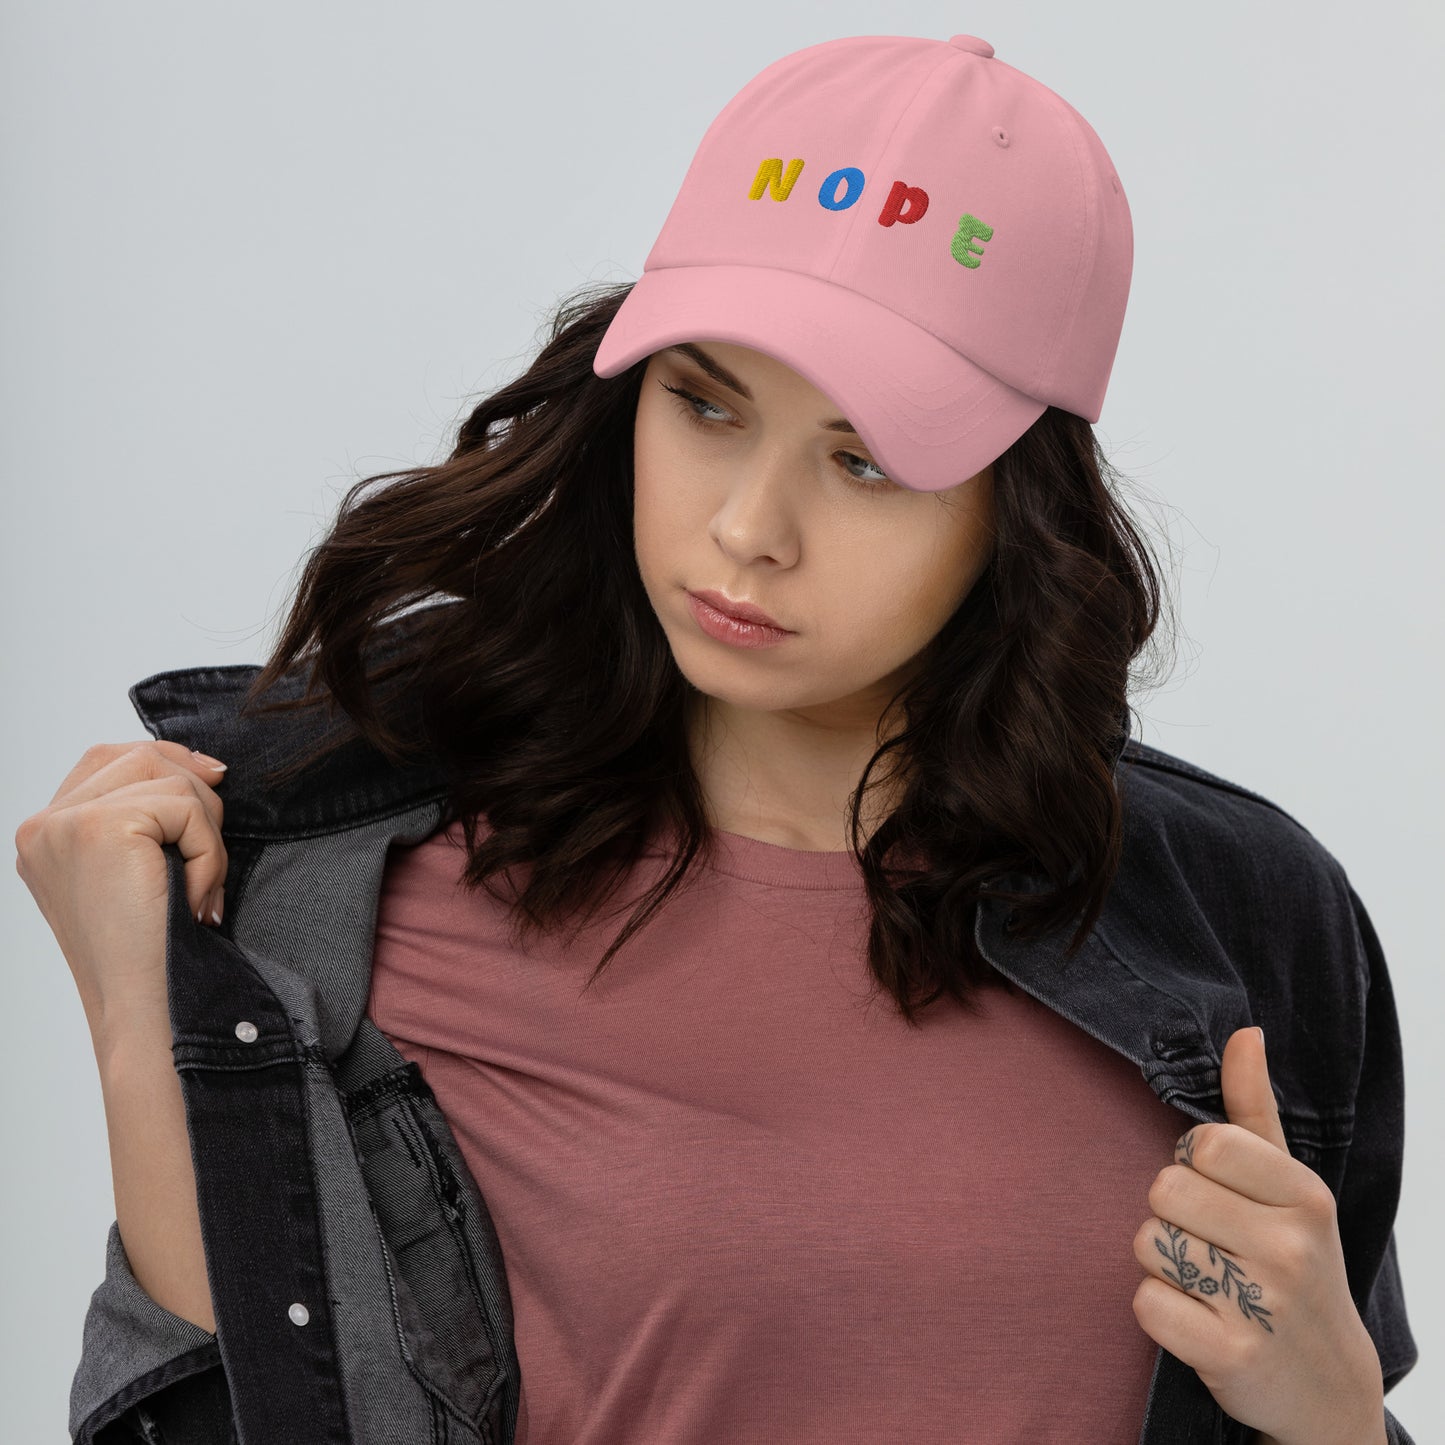 lady wearing pink hat with "NOPE" written on front